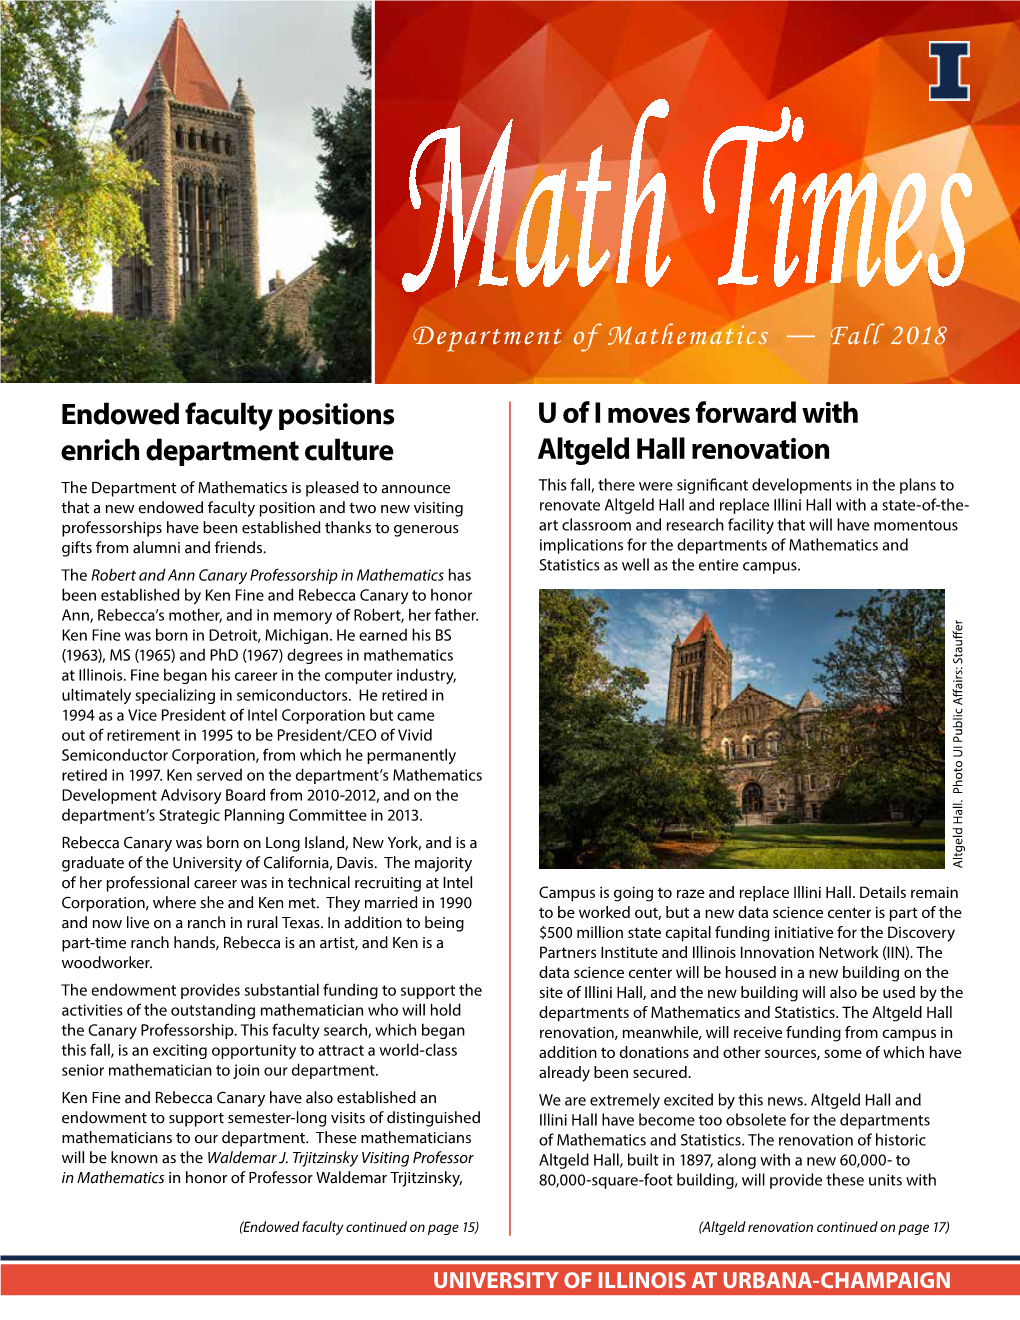 Endowed Faculty Positions Enrich Department Culture U of I Moves